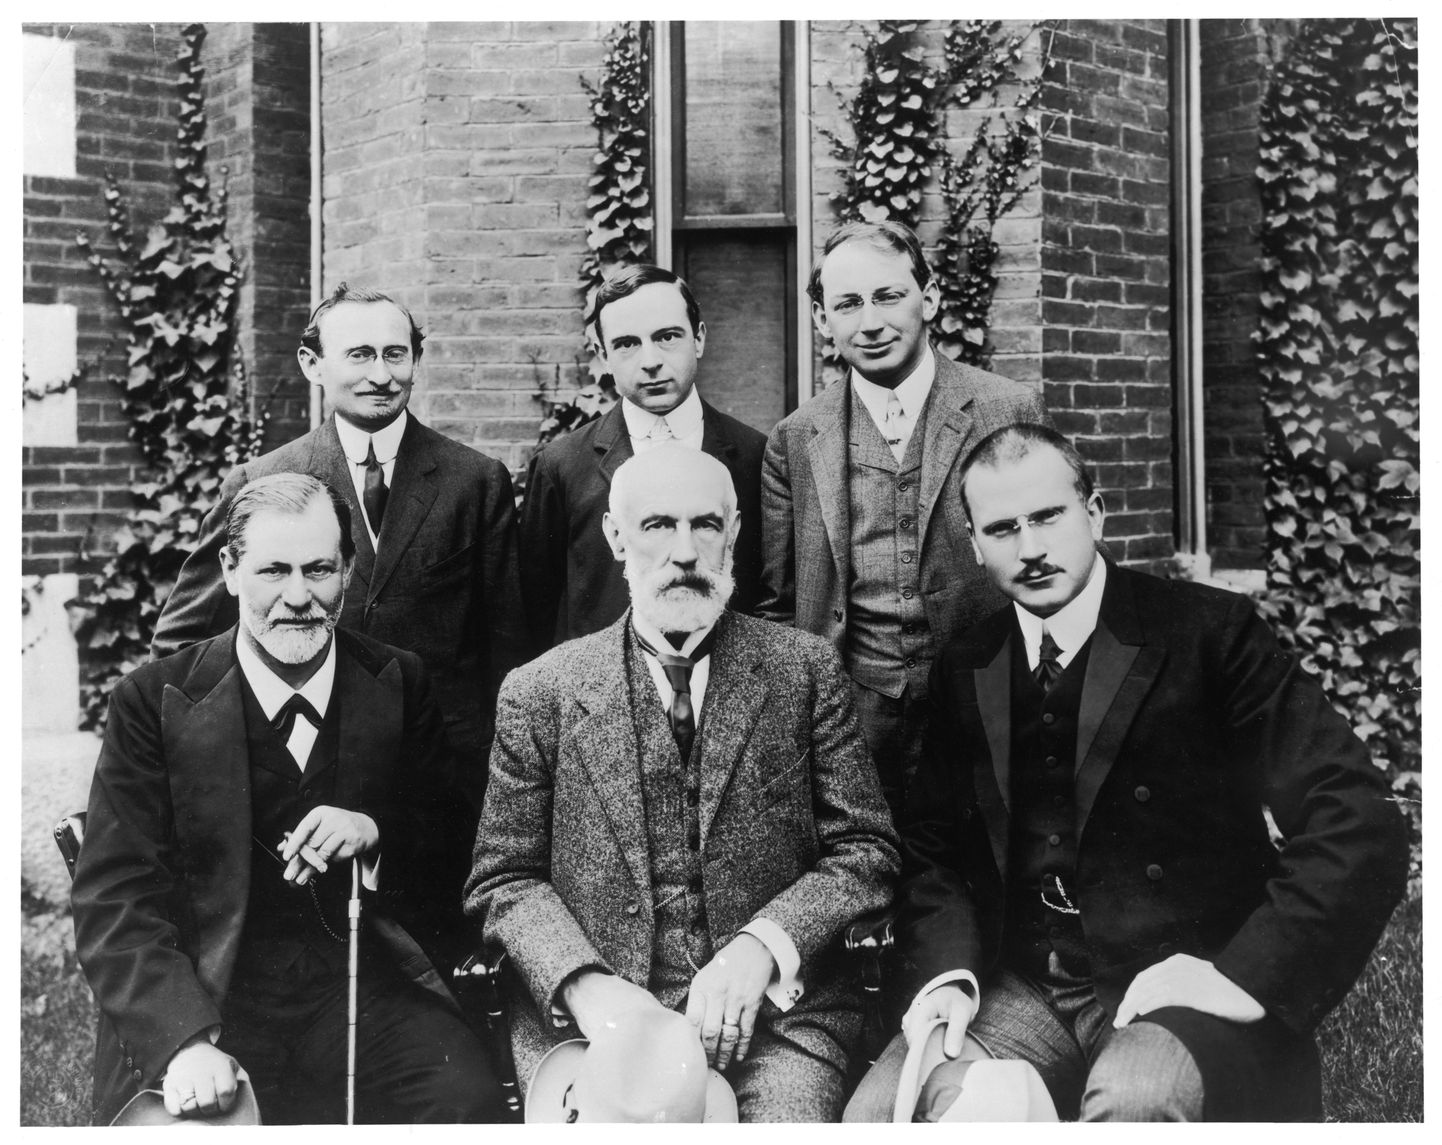 Fotol tagareas: A. A. Brill, E. Jones, S. Ferenczi. Ees: Freud, Stanley Hall, C. G. Jung.    September 1909.